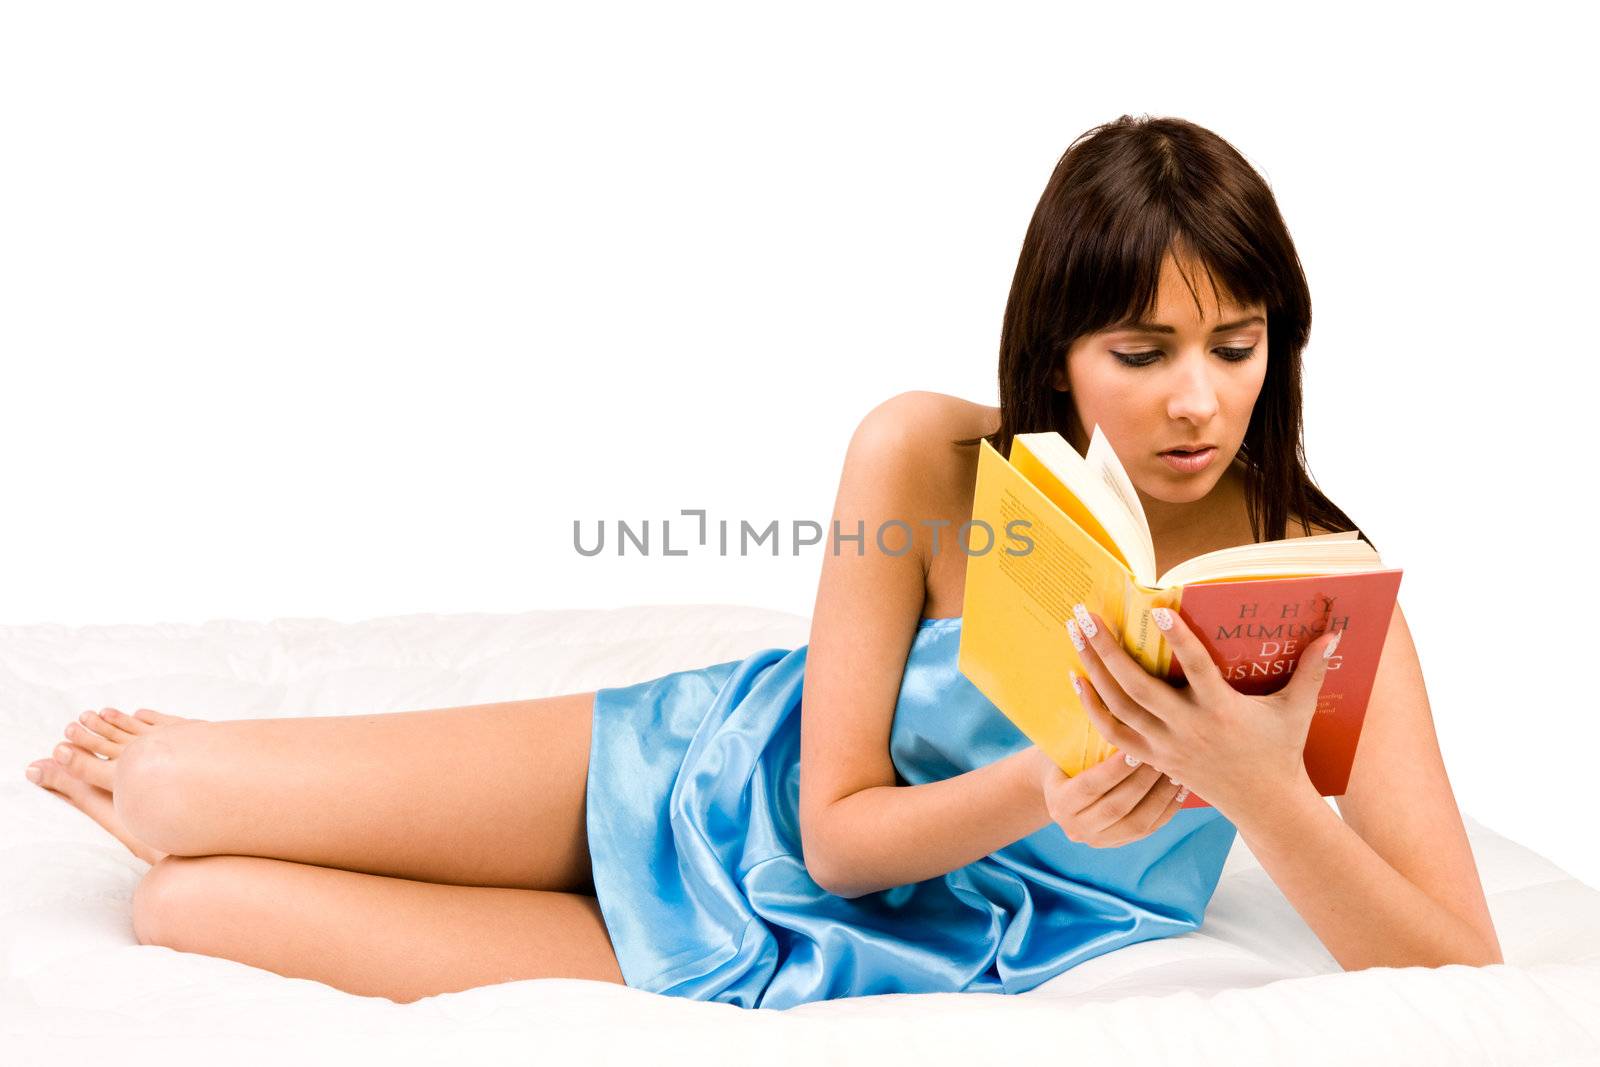 Brunette in pyjama's reading a book in bed.
Titles have been made unreadable so no copyright infrigment.